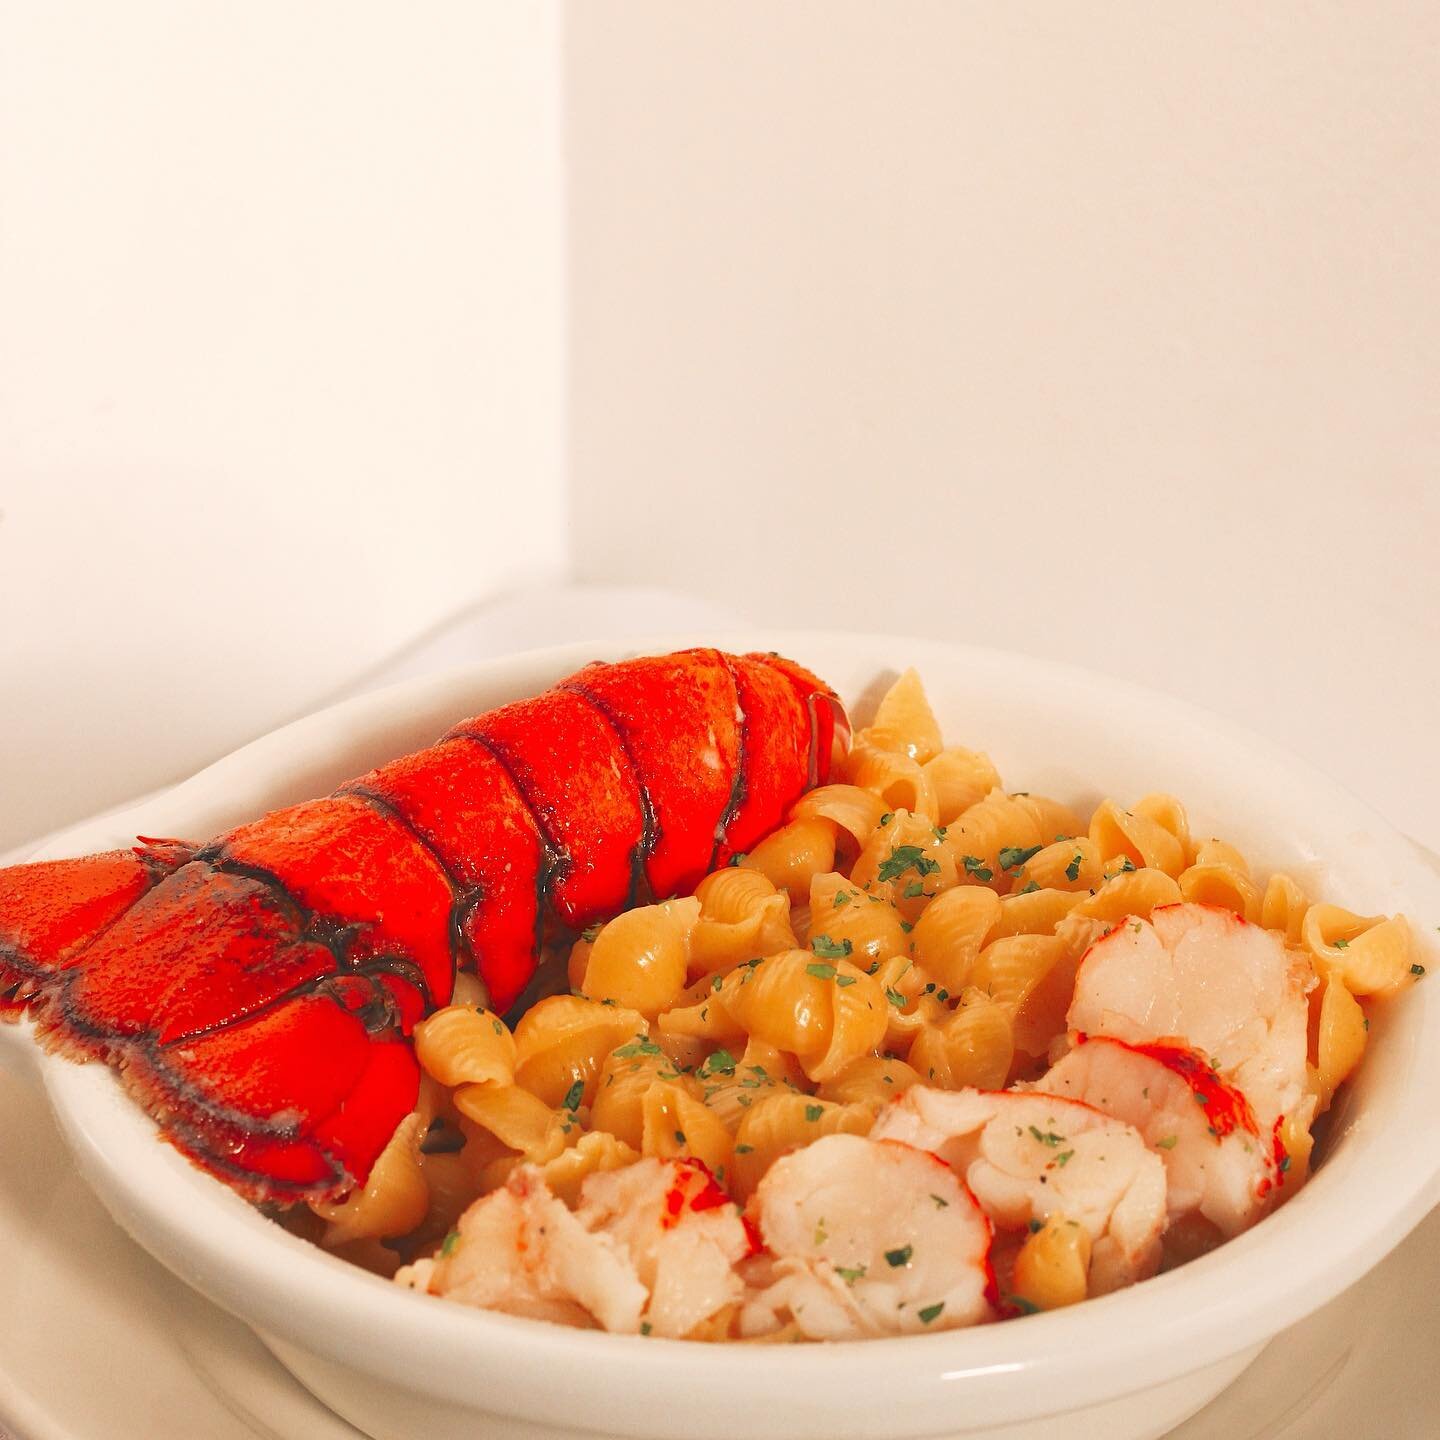 Mac n&rsquo; cheese the @boulevardsteakhouse way! 🦞 Enjoy slices of petite cold water lobster in our lobster mac n&rsquo; cheese! Our mac n&rsquo; cheese comes with a delicious combination of gruyere, white cheddar, jack and parmesan cheese. Yum! Jo